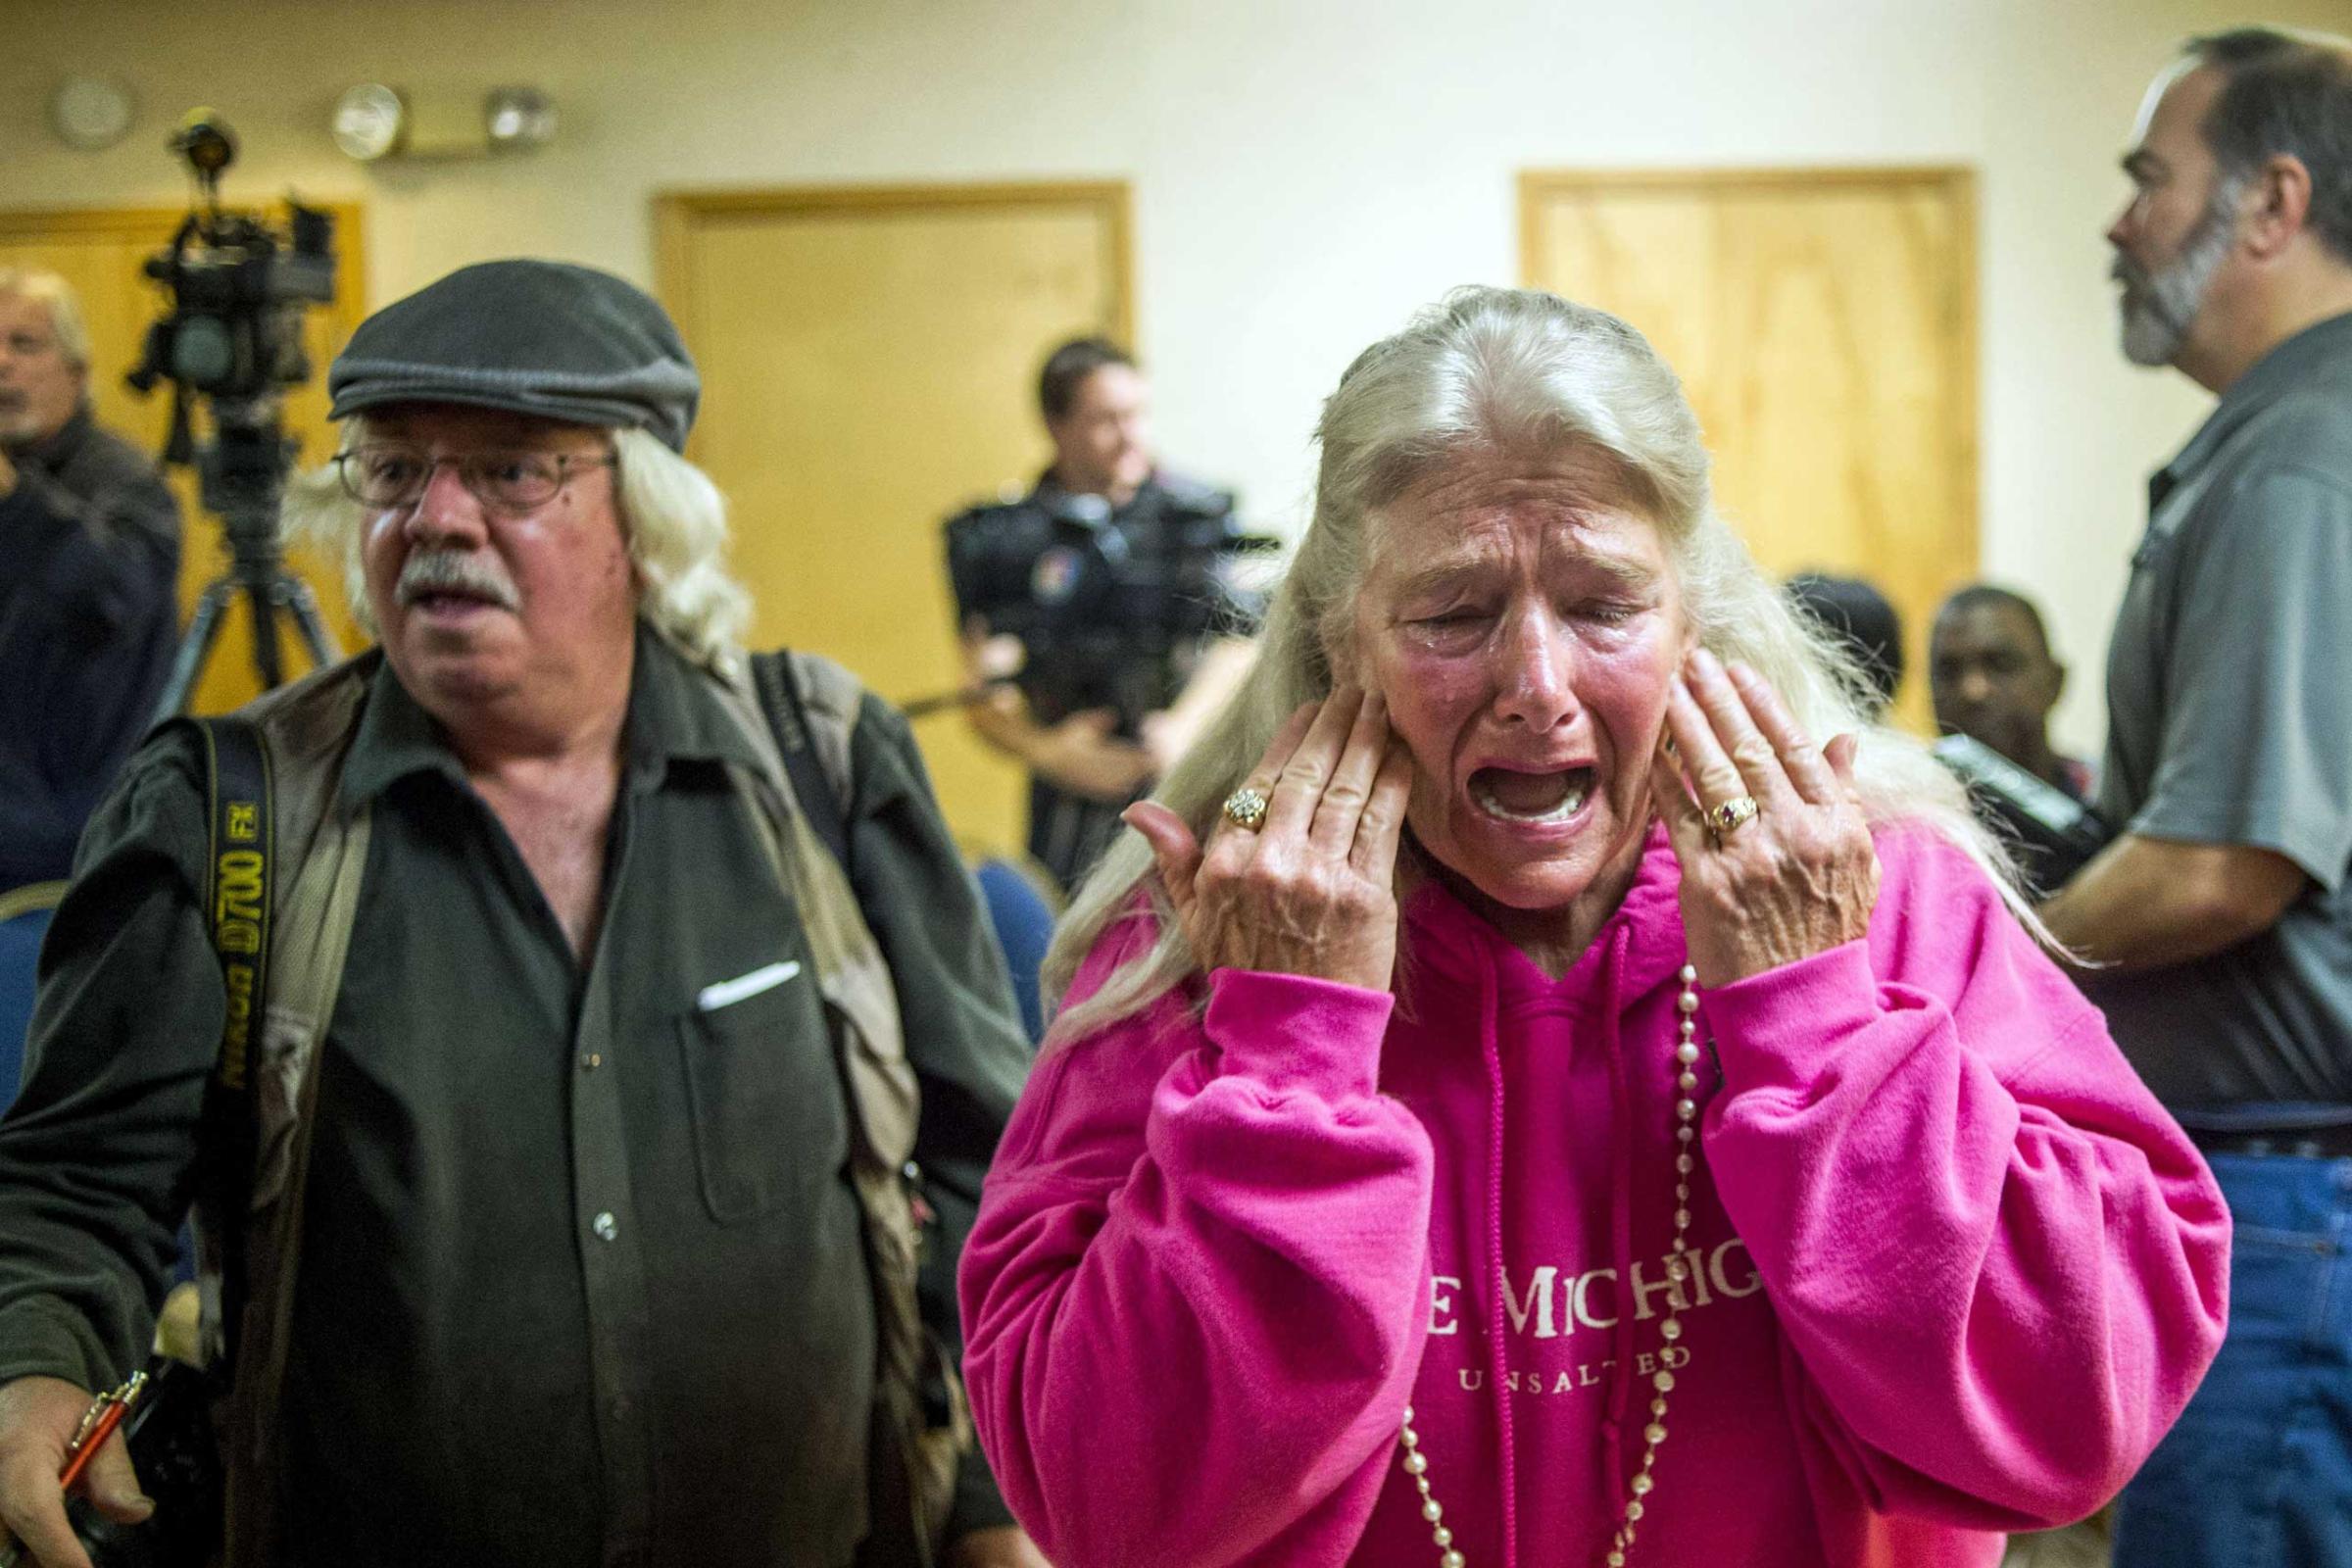 Flint resident Gladyes Williamson cries out through her tears to Melissa Mays, one of six plaintiffs, overwhelmed with frustration of the water issue and joy in the filing of a potential class action lawsuit against both city and state government officials on Nov. 16, 2015, at the Holiday Inn Express in Flint, Mich. The lawsuit claims that these government officials violated constitutional rights providing lead-tainted water to residents, which lead to alleged developing health issues, including hair loss, depression and auto-immune disorders.